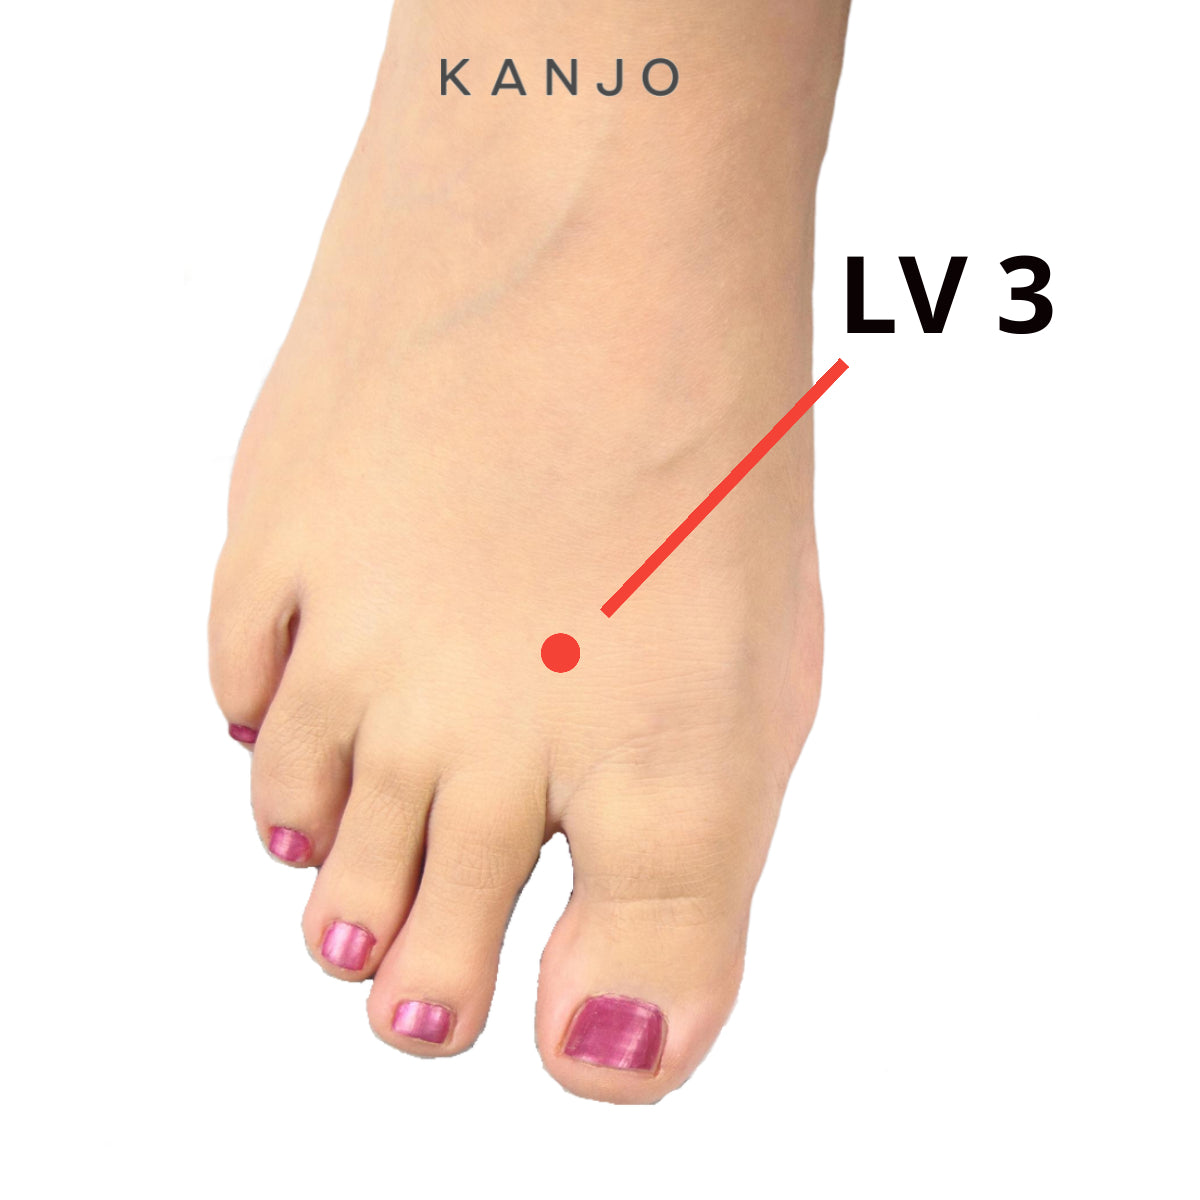 Liver 3 (LV3) Acupressure Point Uses, Benefits, Video